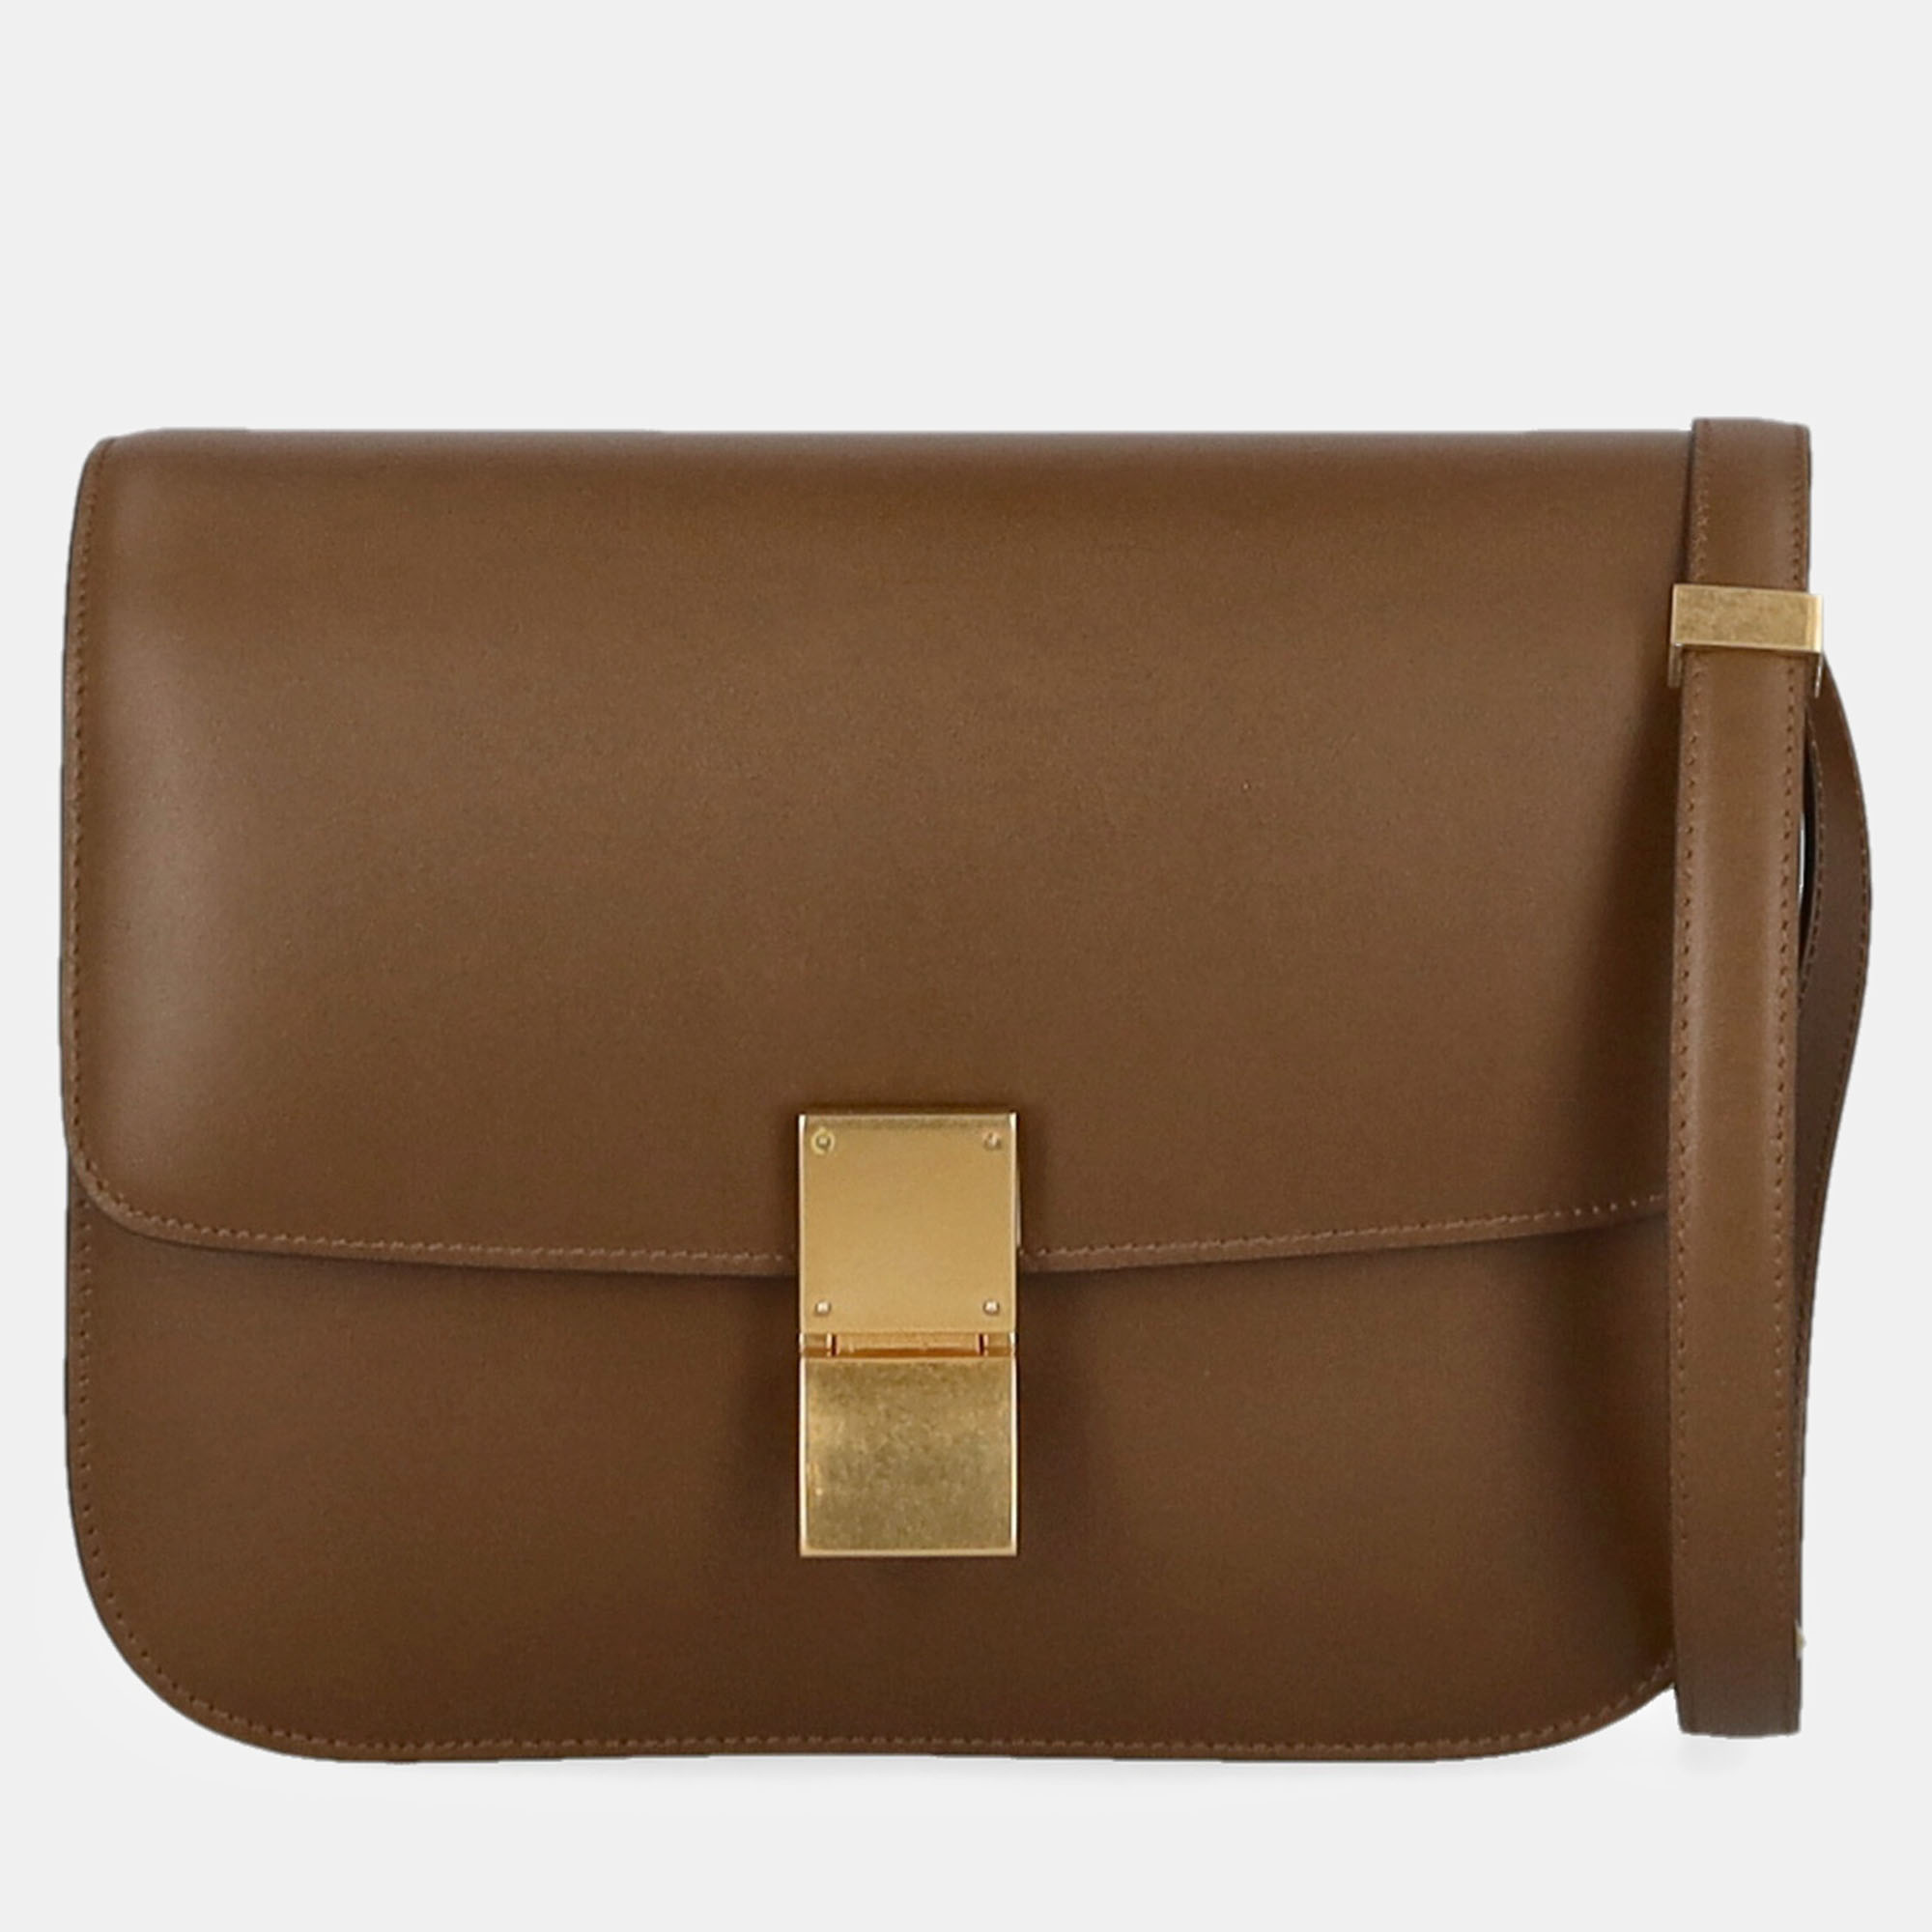 Celine Classic -  Women's Leather Cross Body Bag - Brown - One Size